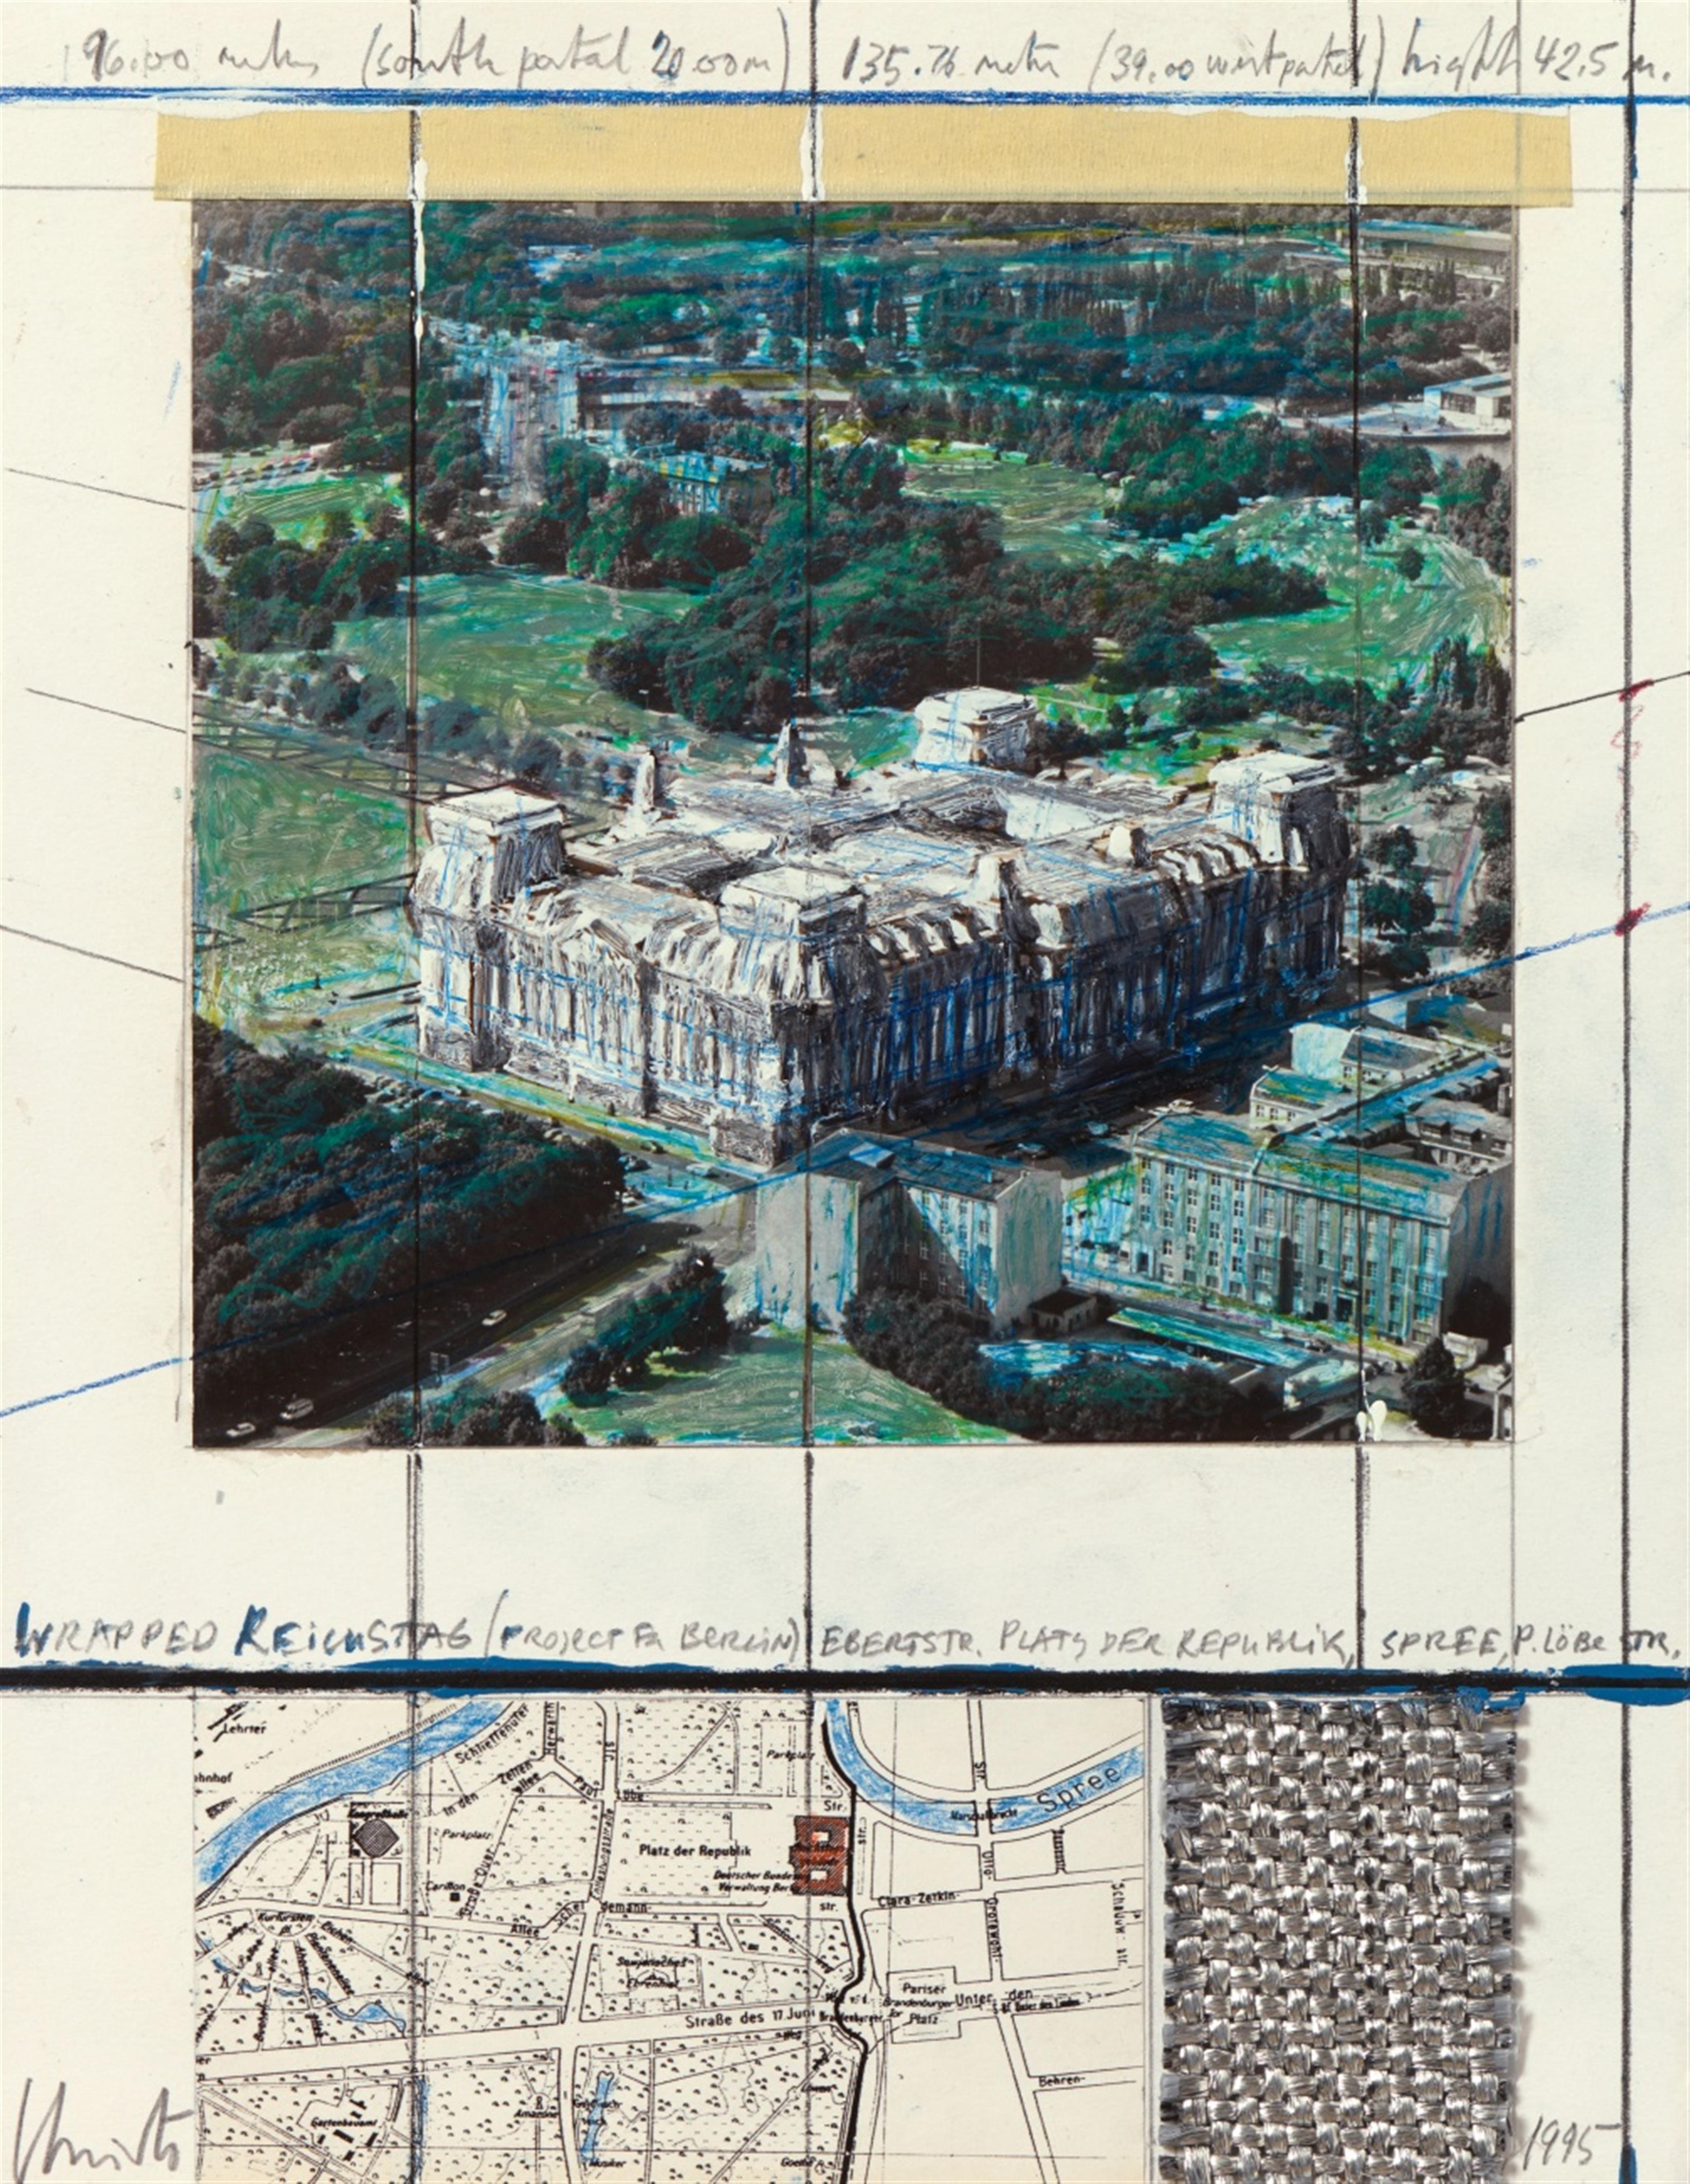 Christo - Wrapped Reichstag (Project for Berlin) - image-1